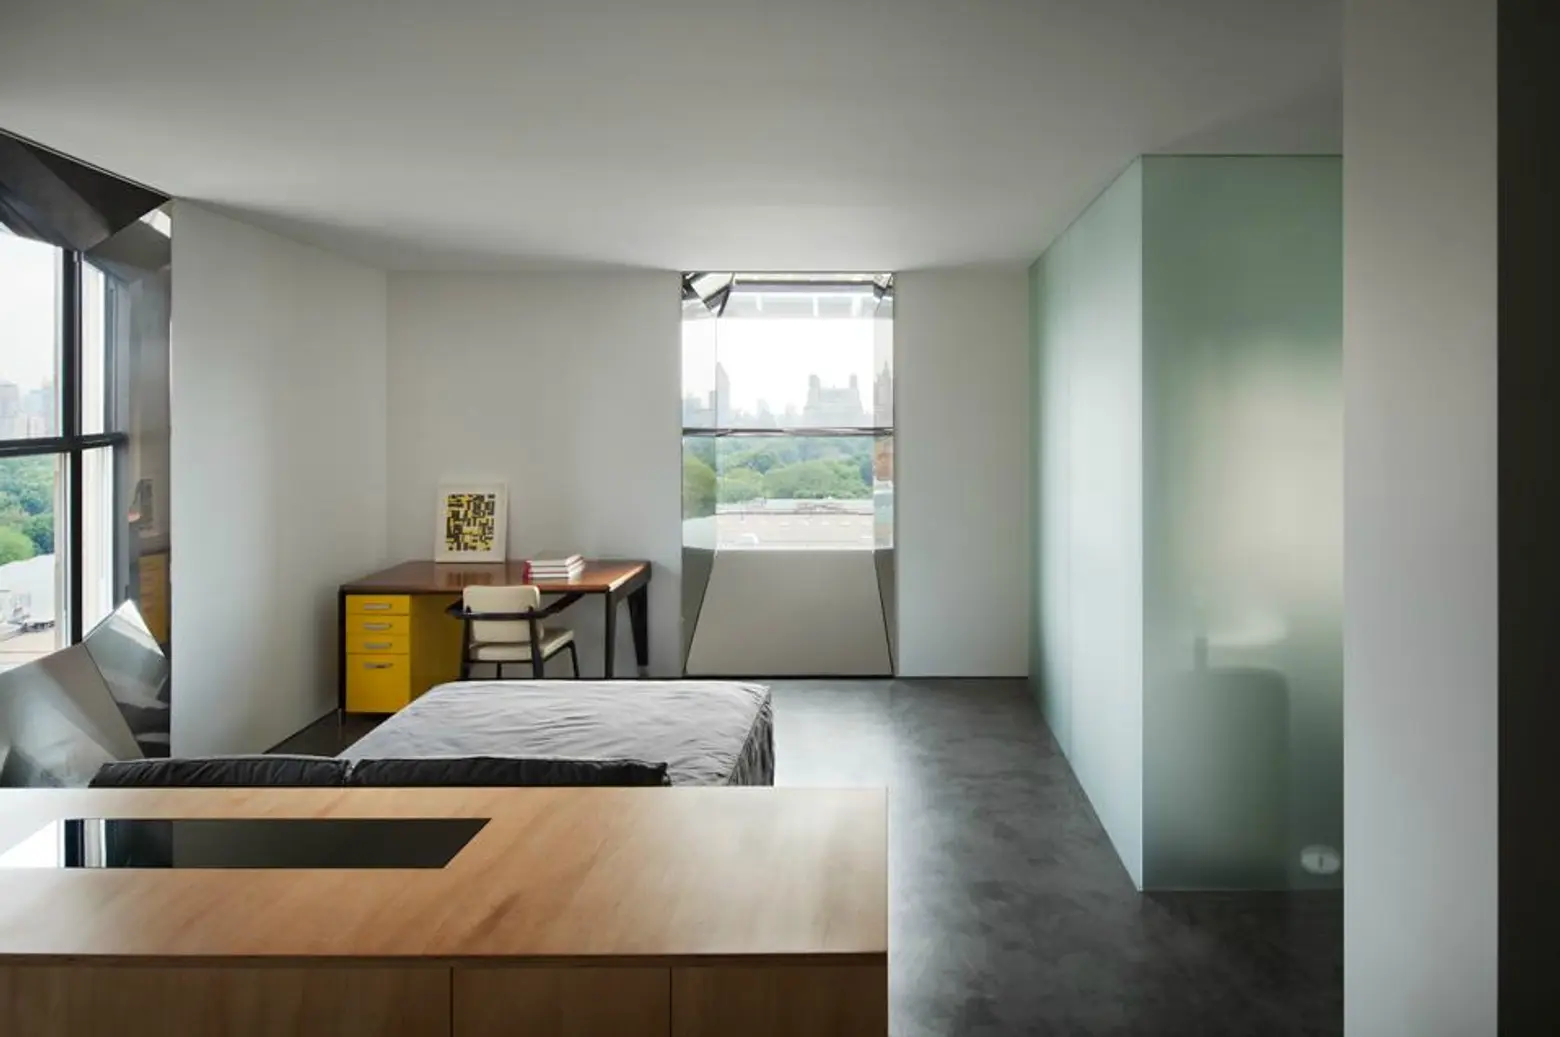 Minimalist Renovation, Thomas Phifer, Jill Sander's CEO, Fifth Avenue Apartment, Constance Darrow, and her husband Angelo Lombardi, ultra minimalistic home, ultra modern, Whitney Museum of American Art, Jean Prouvé, Jean Royère.